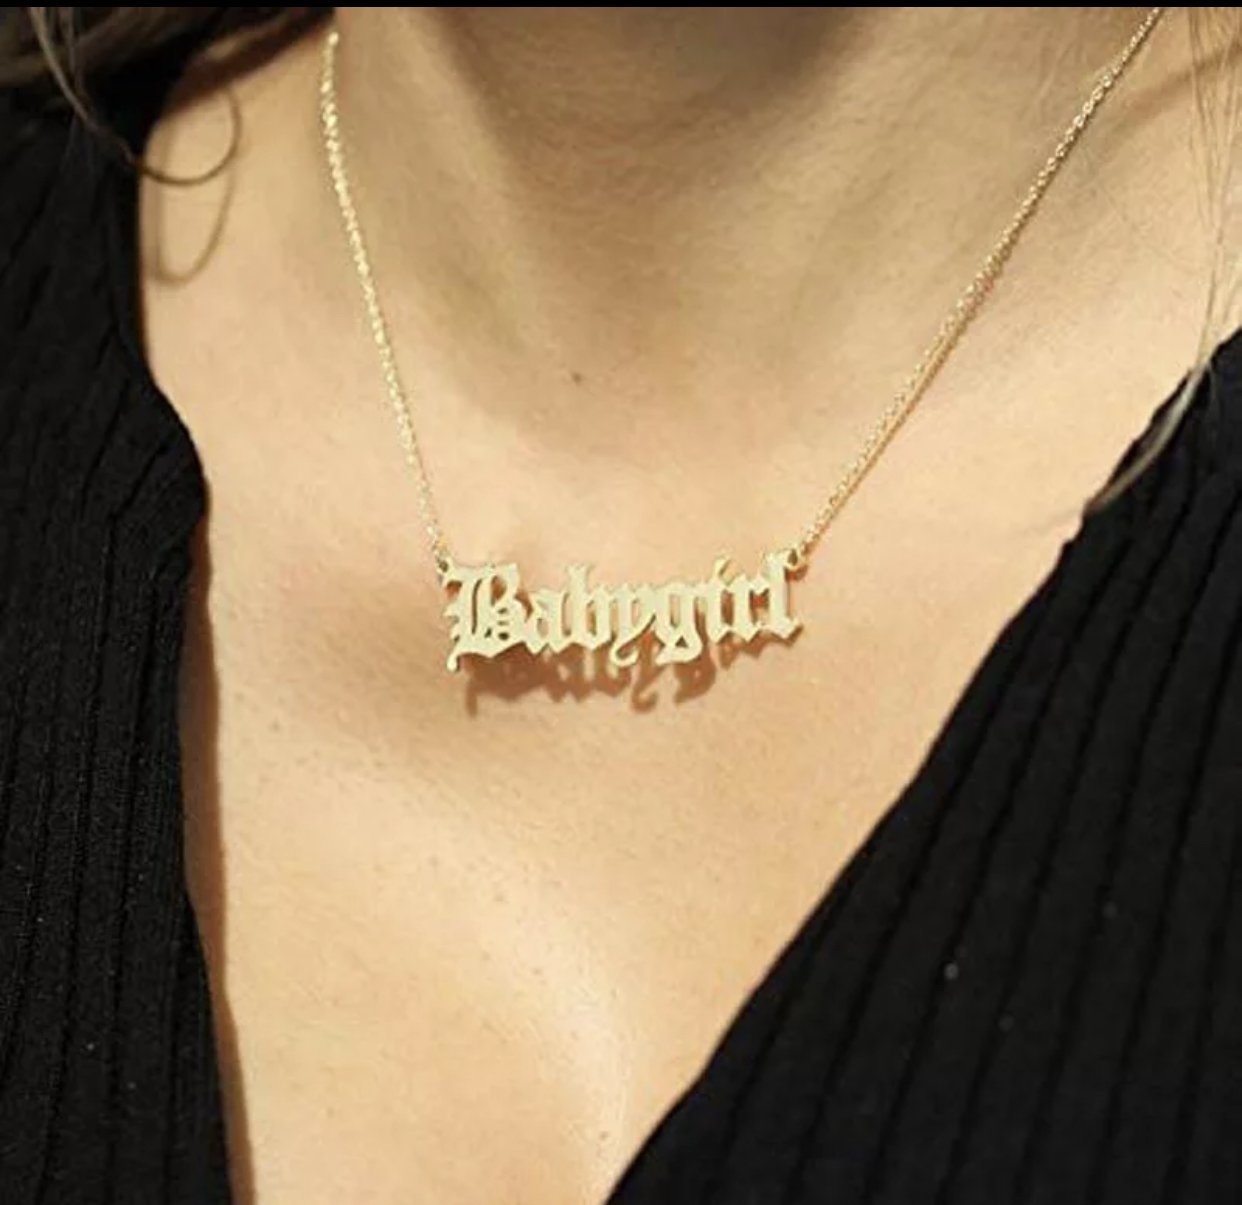 Babygirl Necklace necklace The Sis Kiss